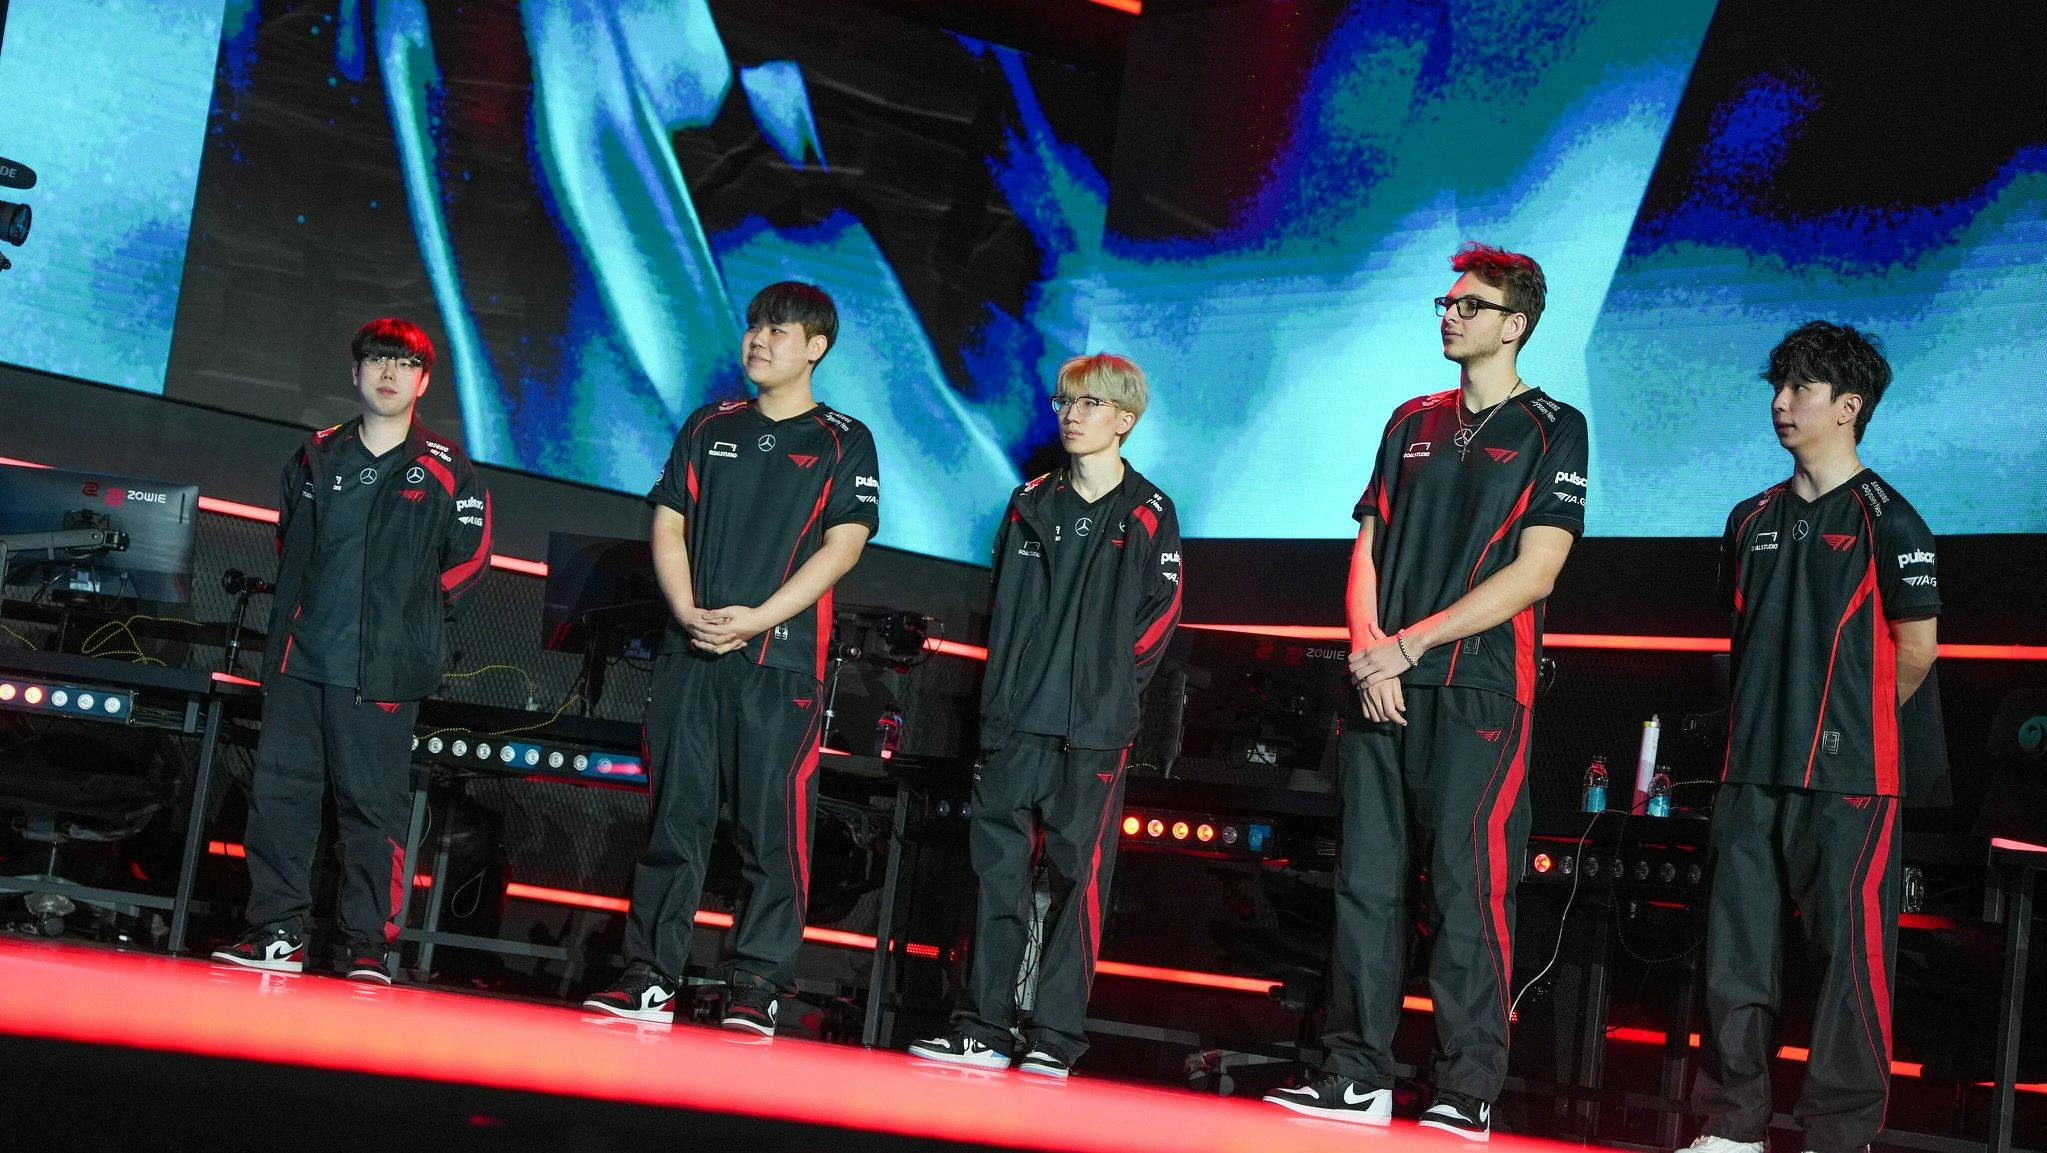 T1 upsets Gen.G to secure VCT Masters Shanghai qualification